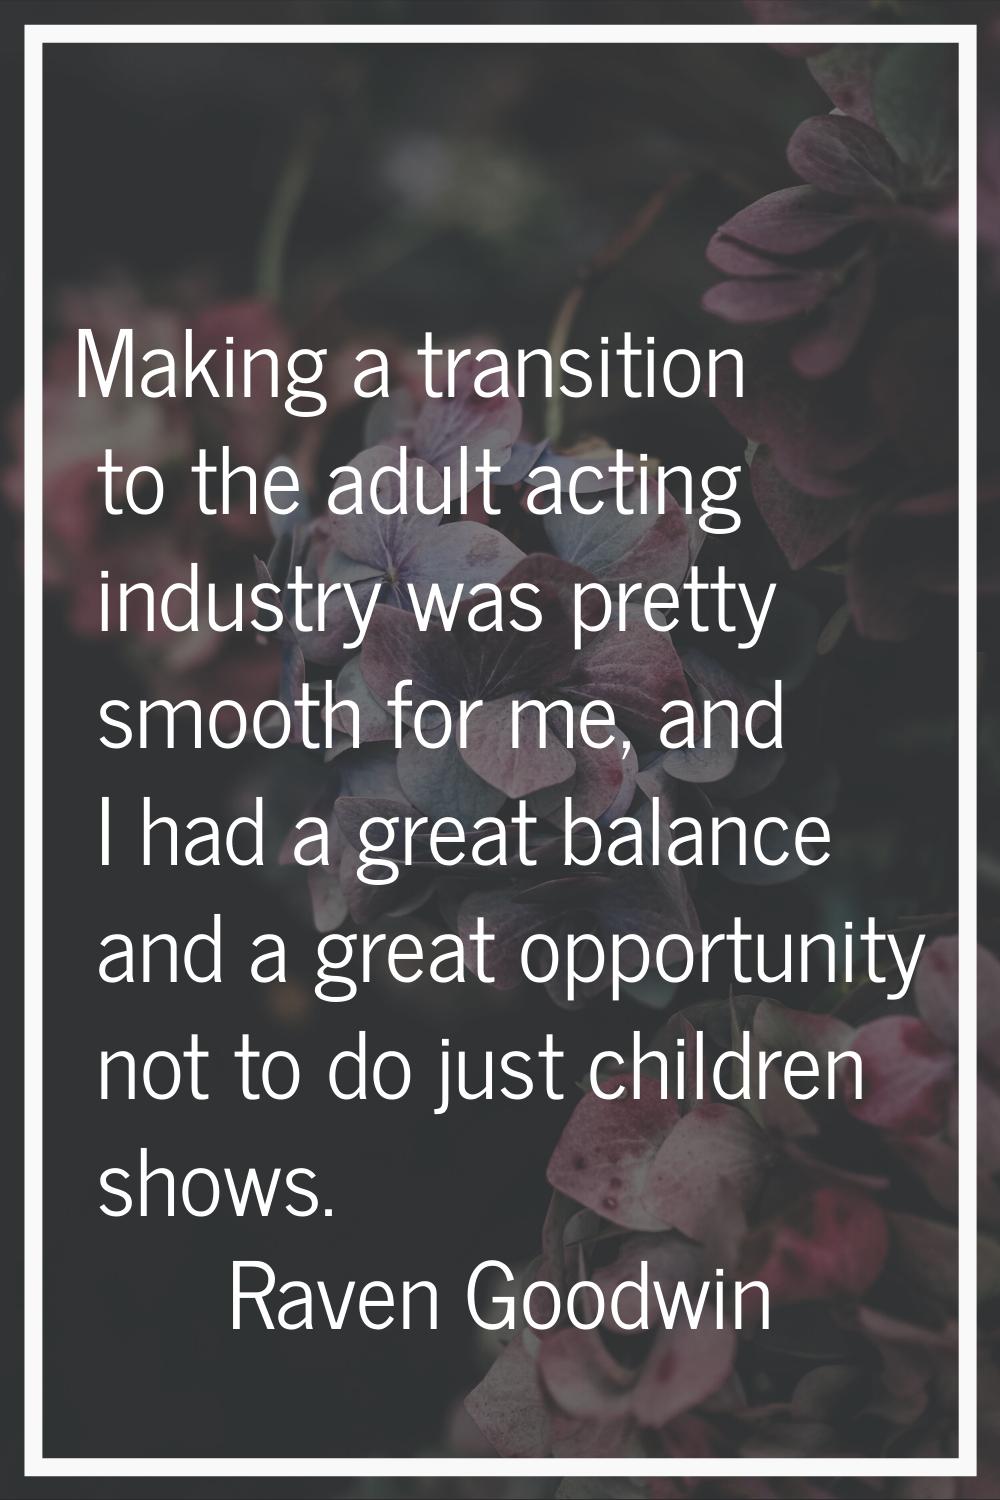 Making a transition to the adult acting industry was pretty smooth for me, and I had a great balanc